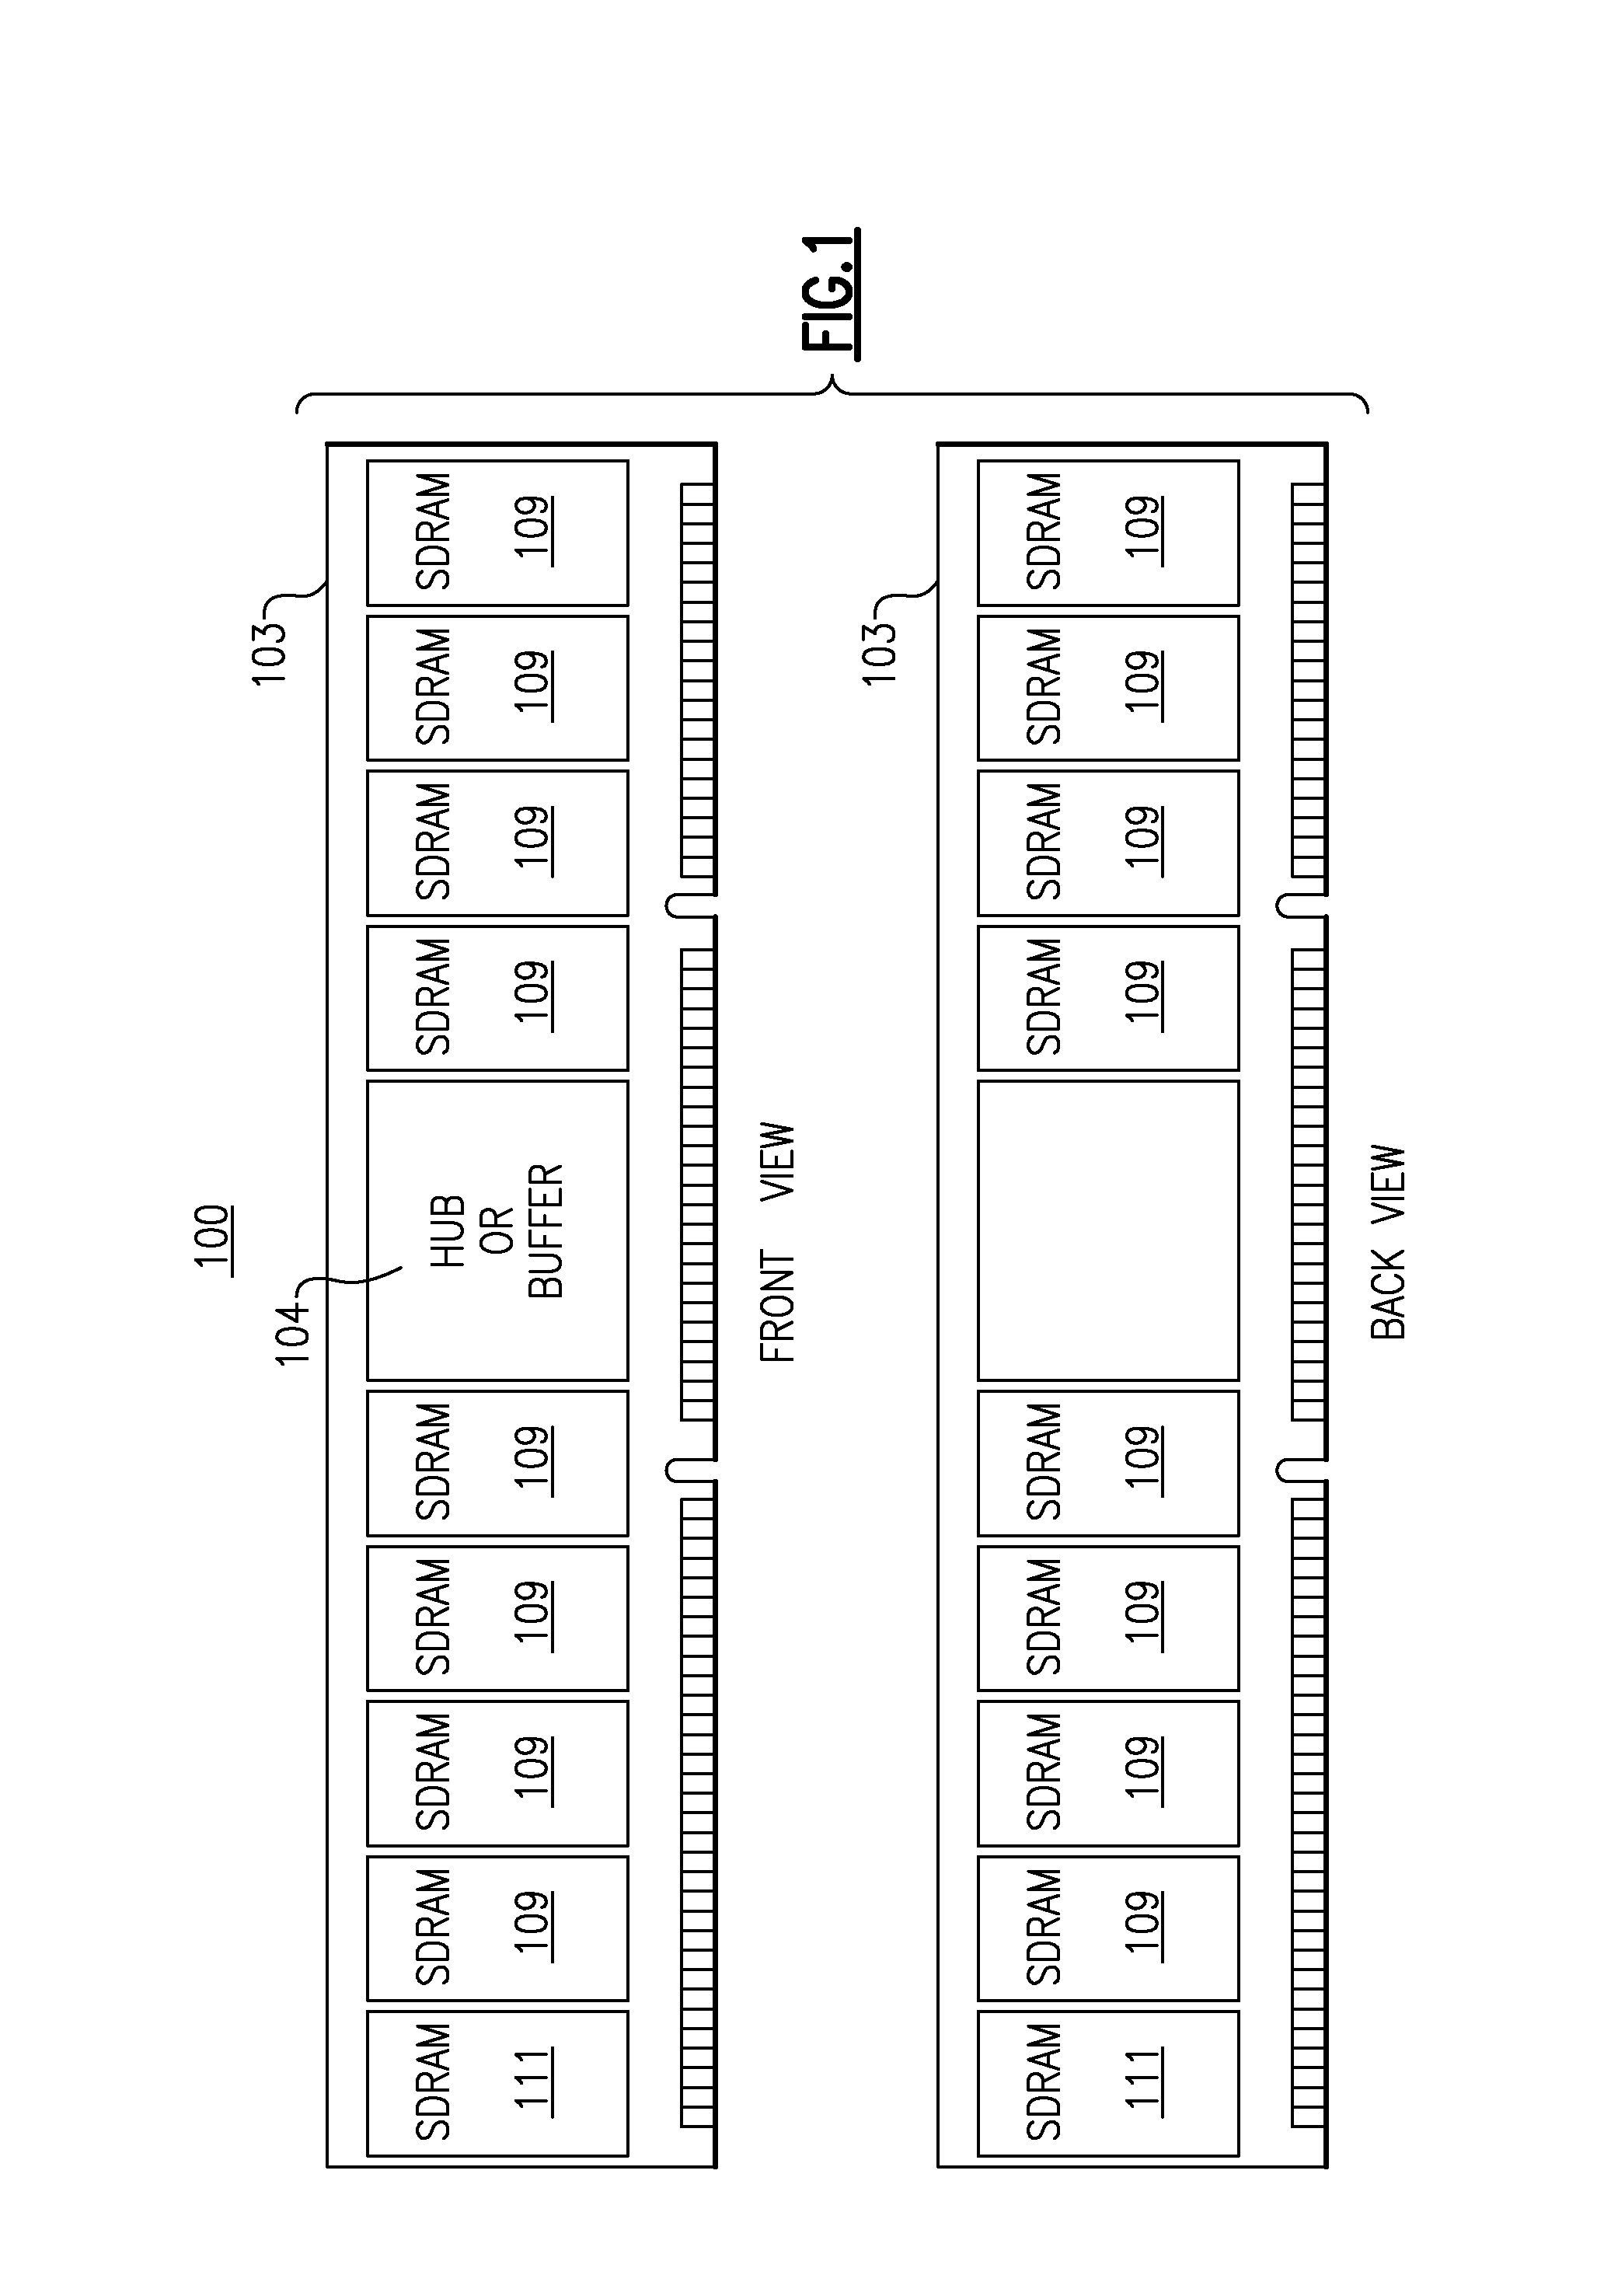 Power Management of a Spare DRAM on a Buffered DIMM by Issuing a Power On/Off Command to the DRAM Device